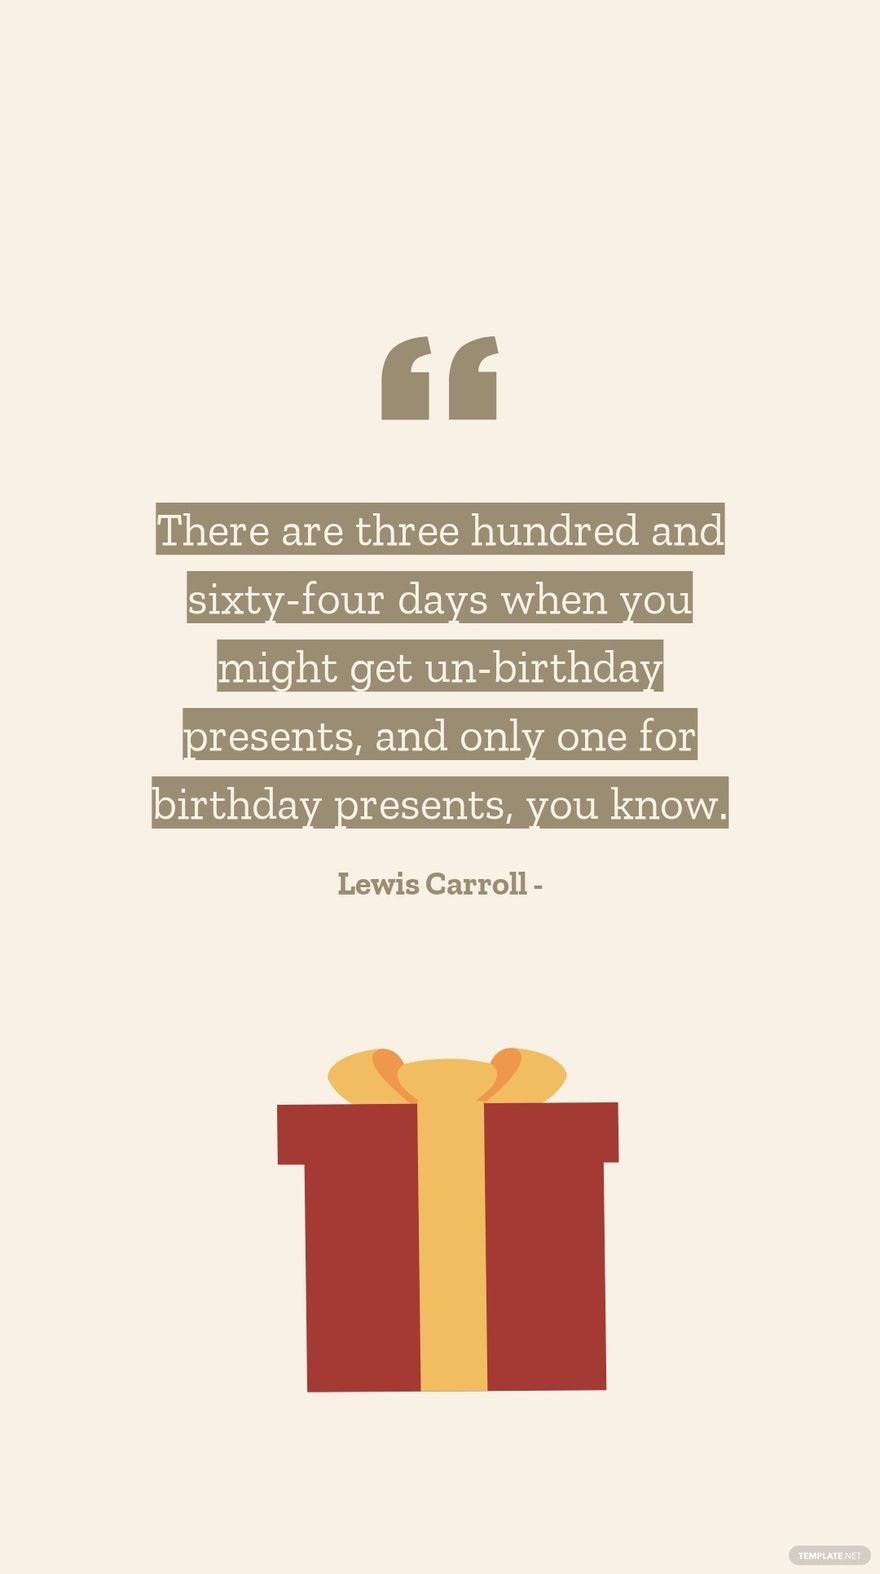 Lewis Carroll - There are three hundred and sixty-four days when you might get un-birthday presents, and only one for birthday presents, you know. in JPG